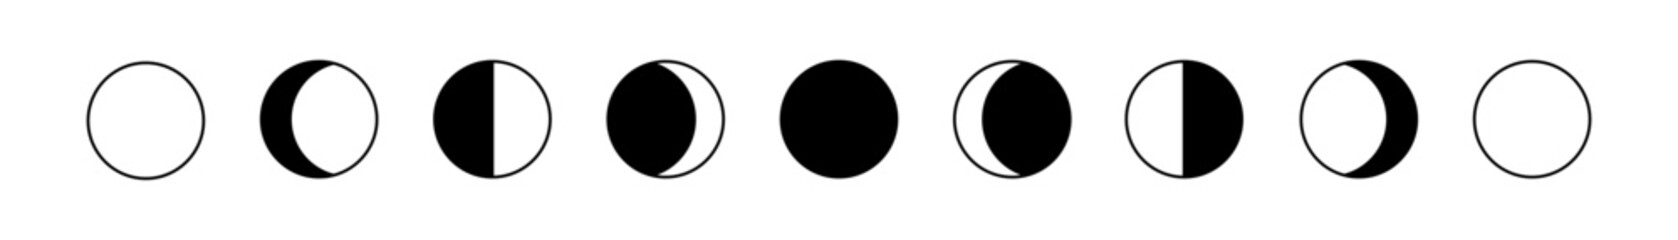 Moon phases icon night space astronomy and nature moon phases sphere shadow. The whole cycle from new moon to full moon.